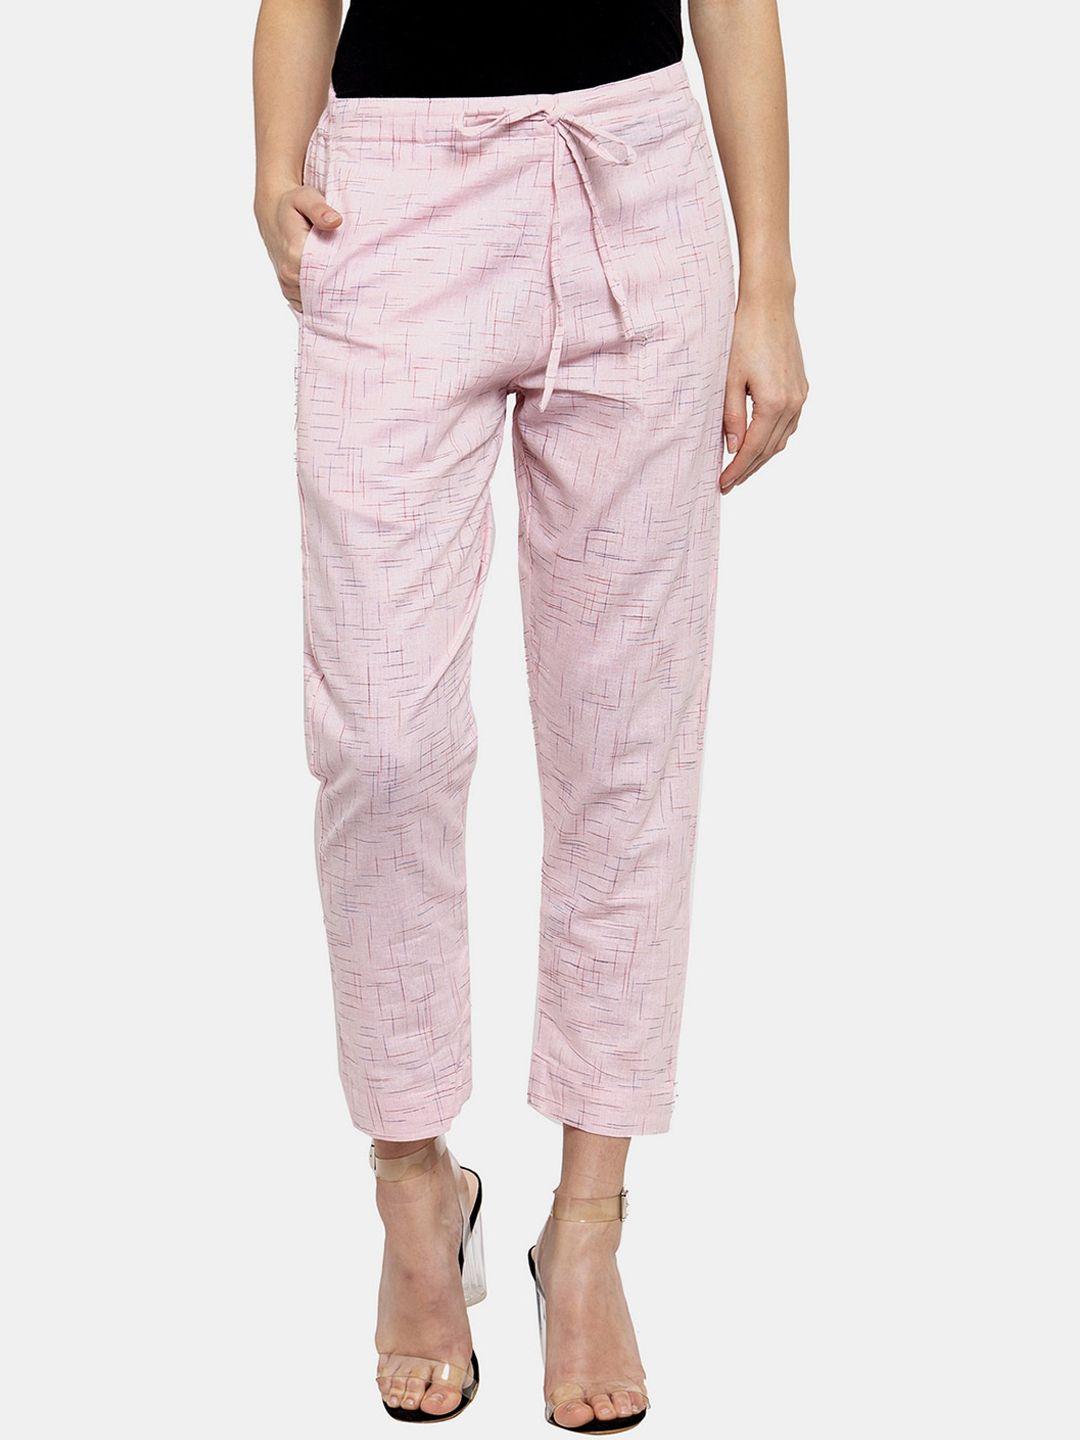 enchanted drapes woman pink printed trousers